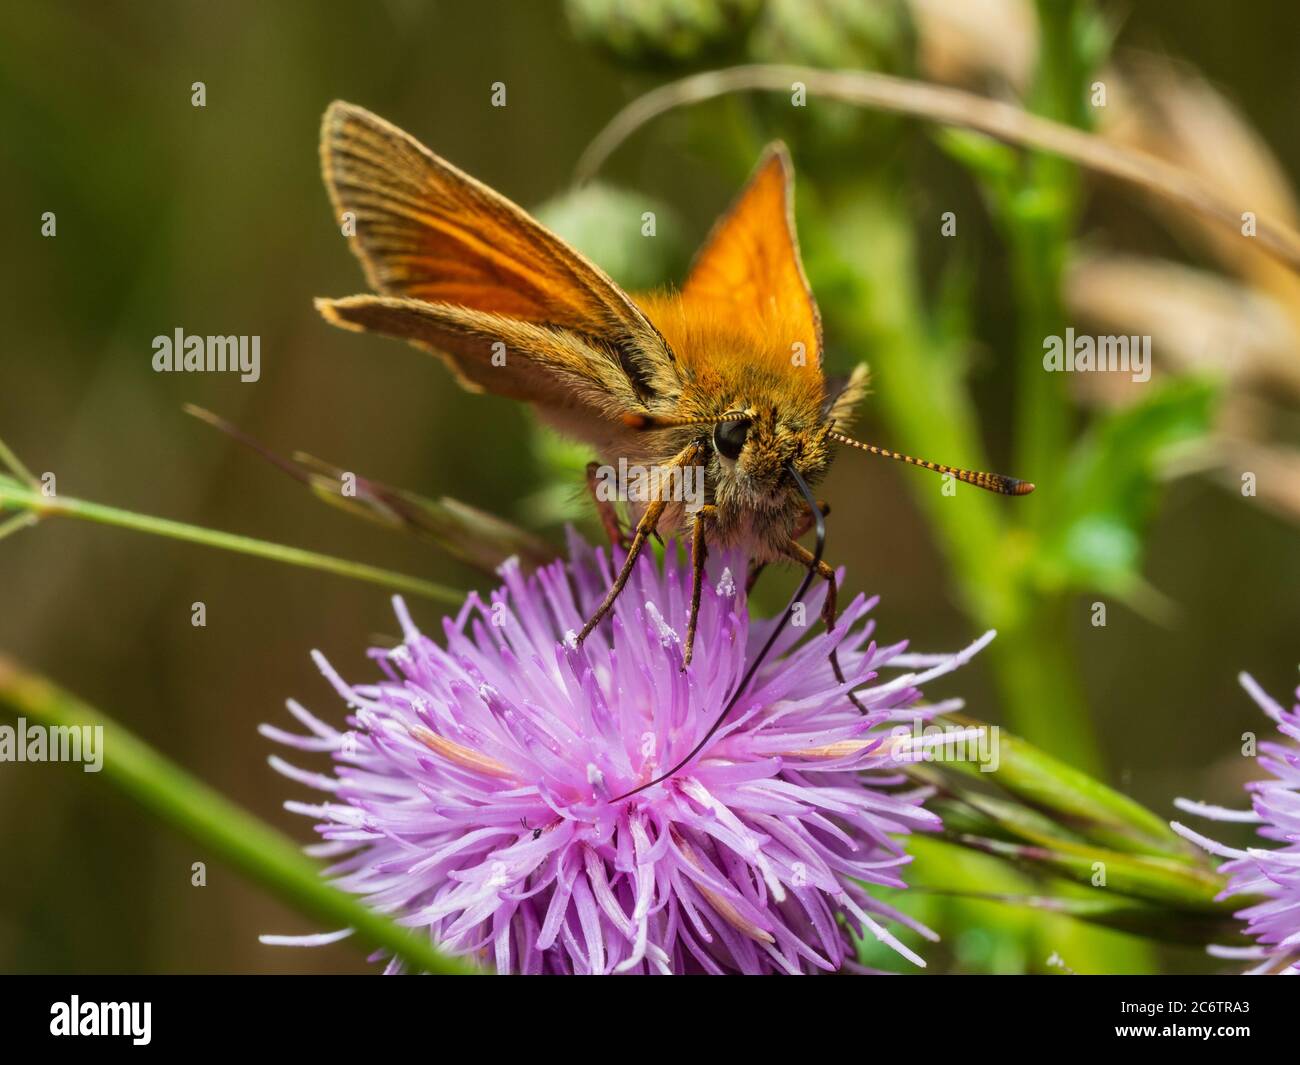 Adult male small skipper butterfly feeding on creeping thistle, Cirsium arvense, in UK grassland Stock Photo